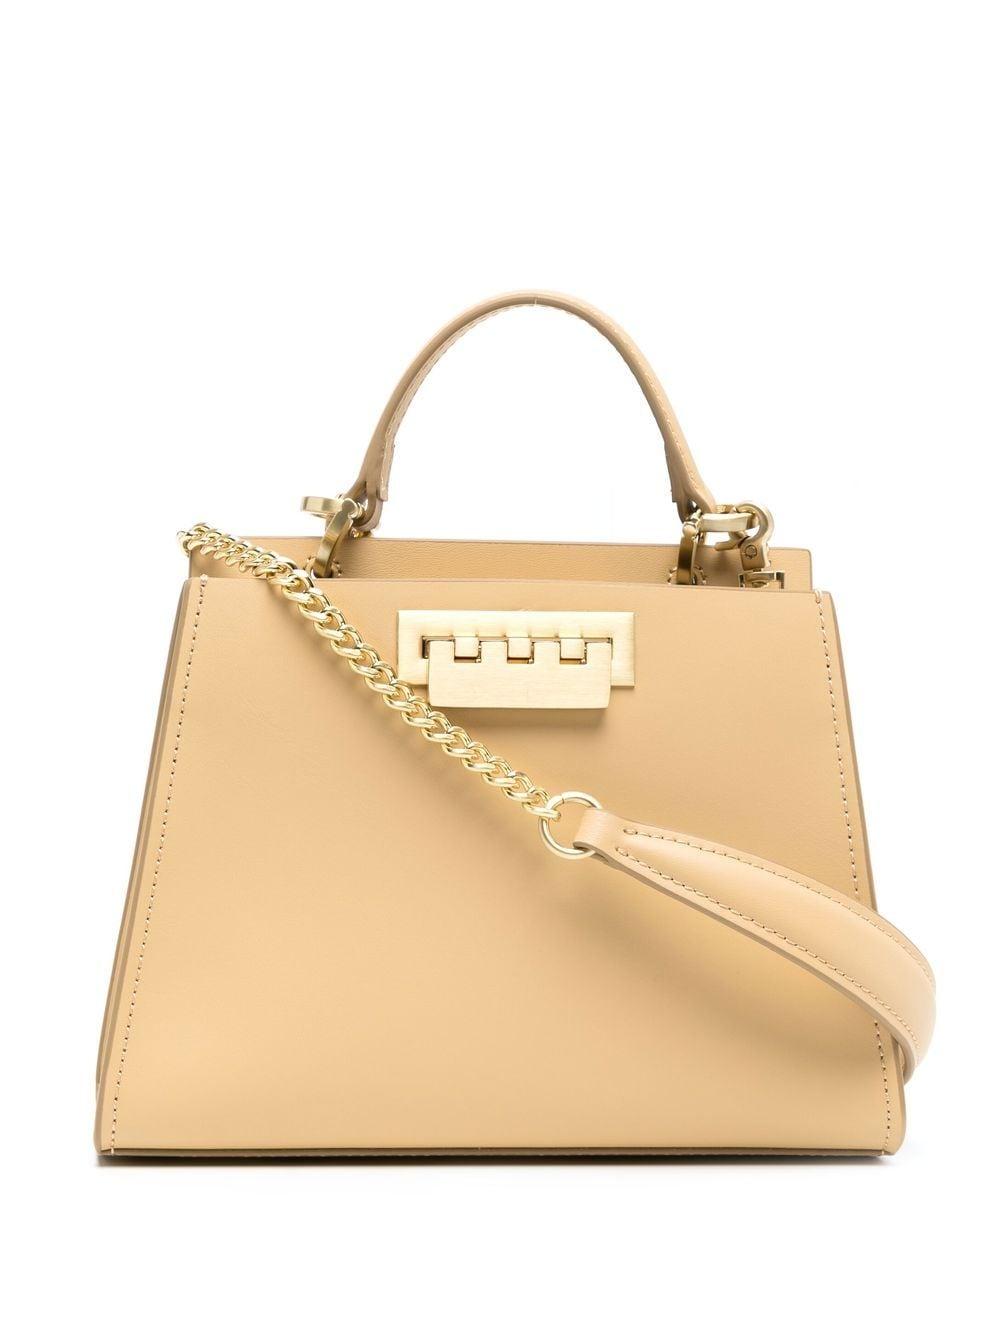 Zac Zac Posen Earthette Leather Shoulder Bag in Yellow (Natural) | Lyst